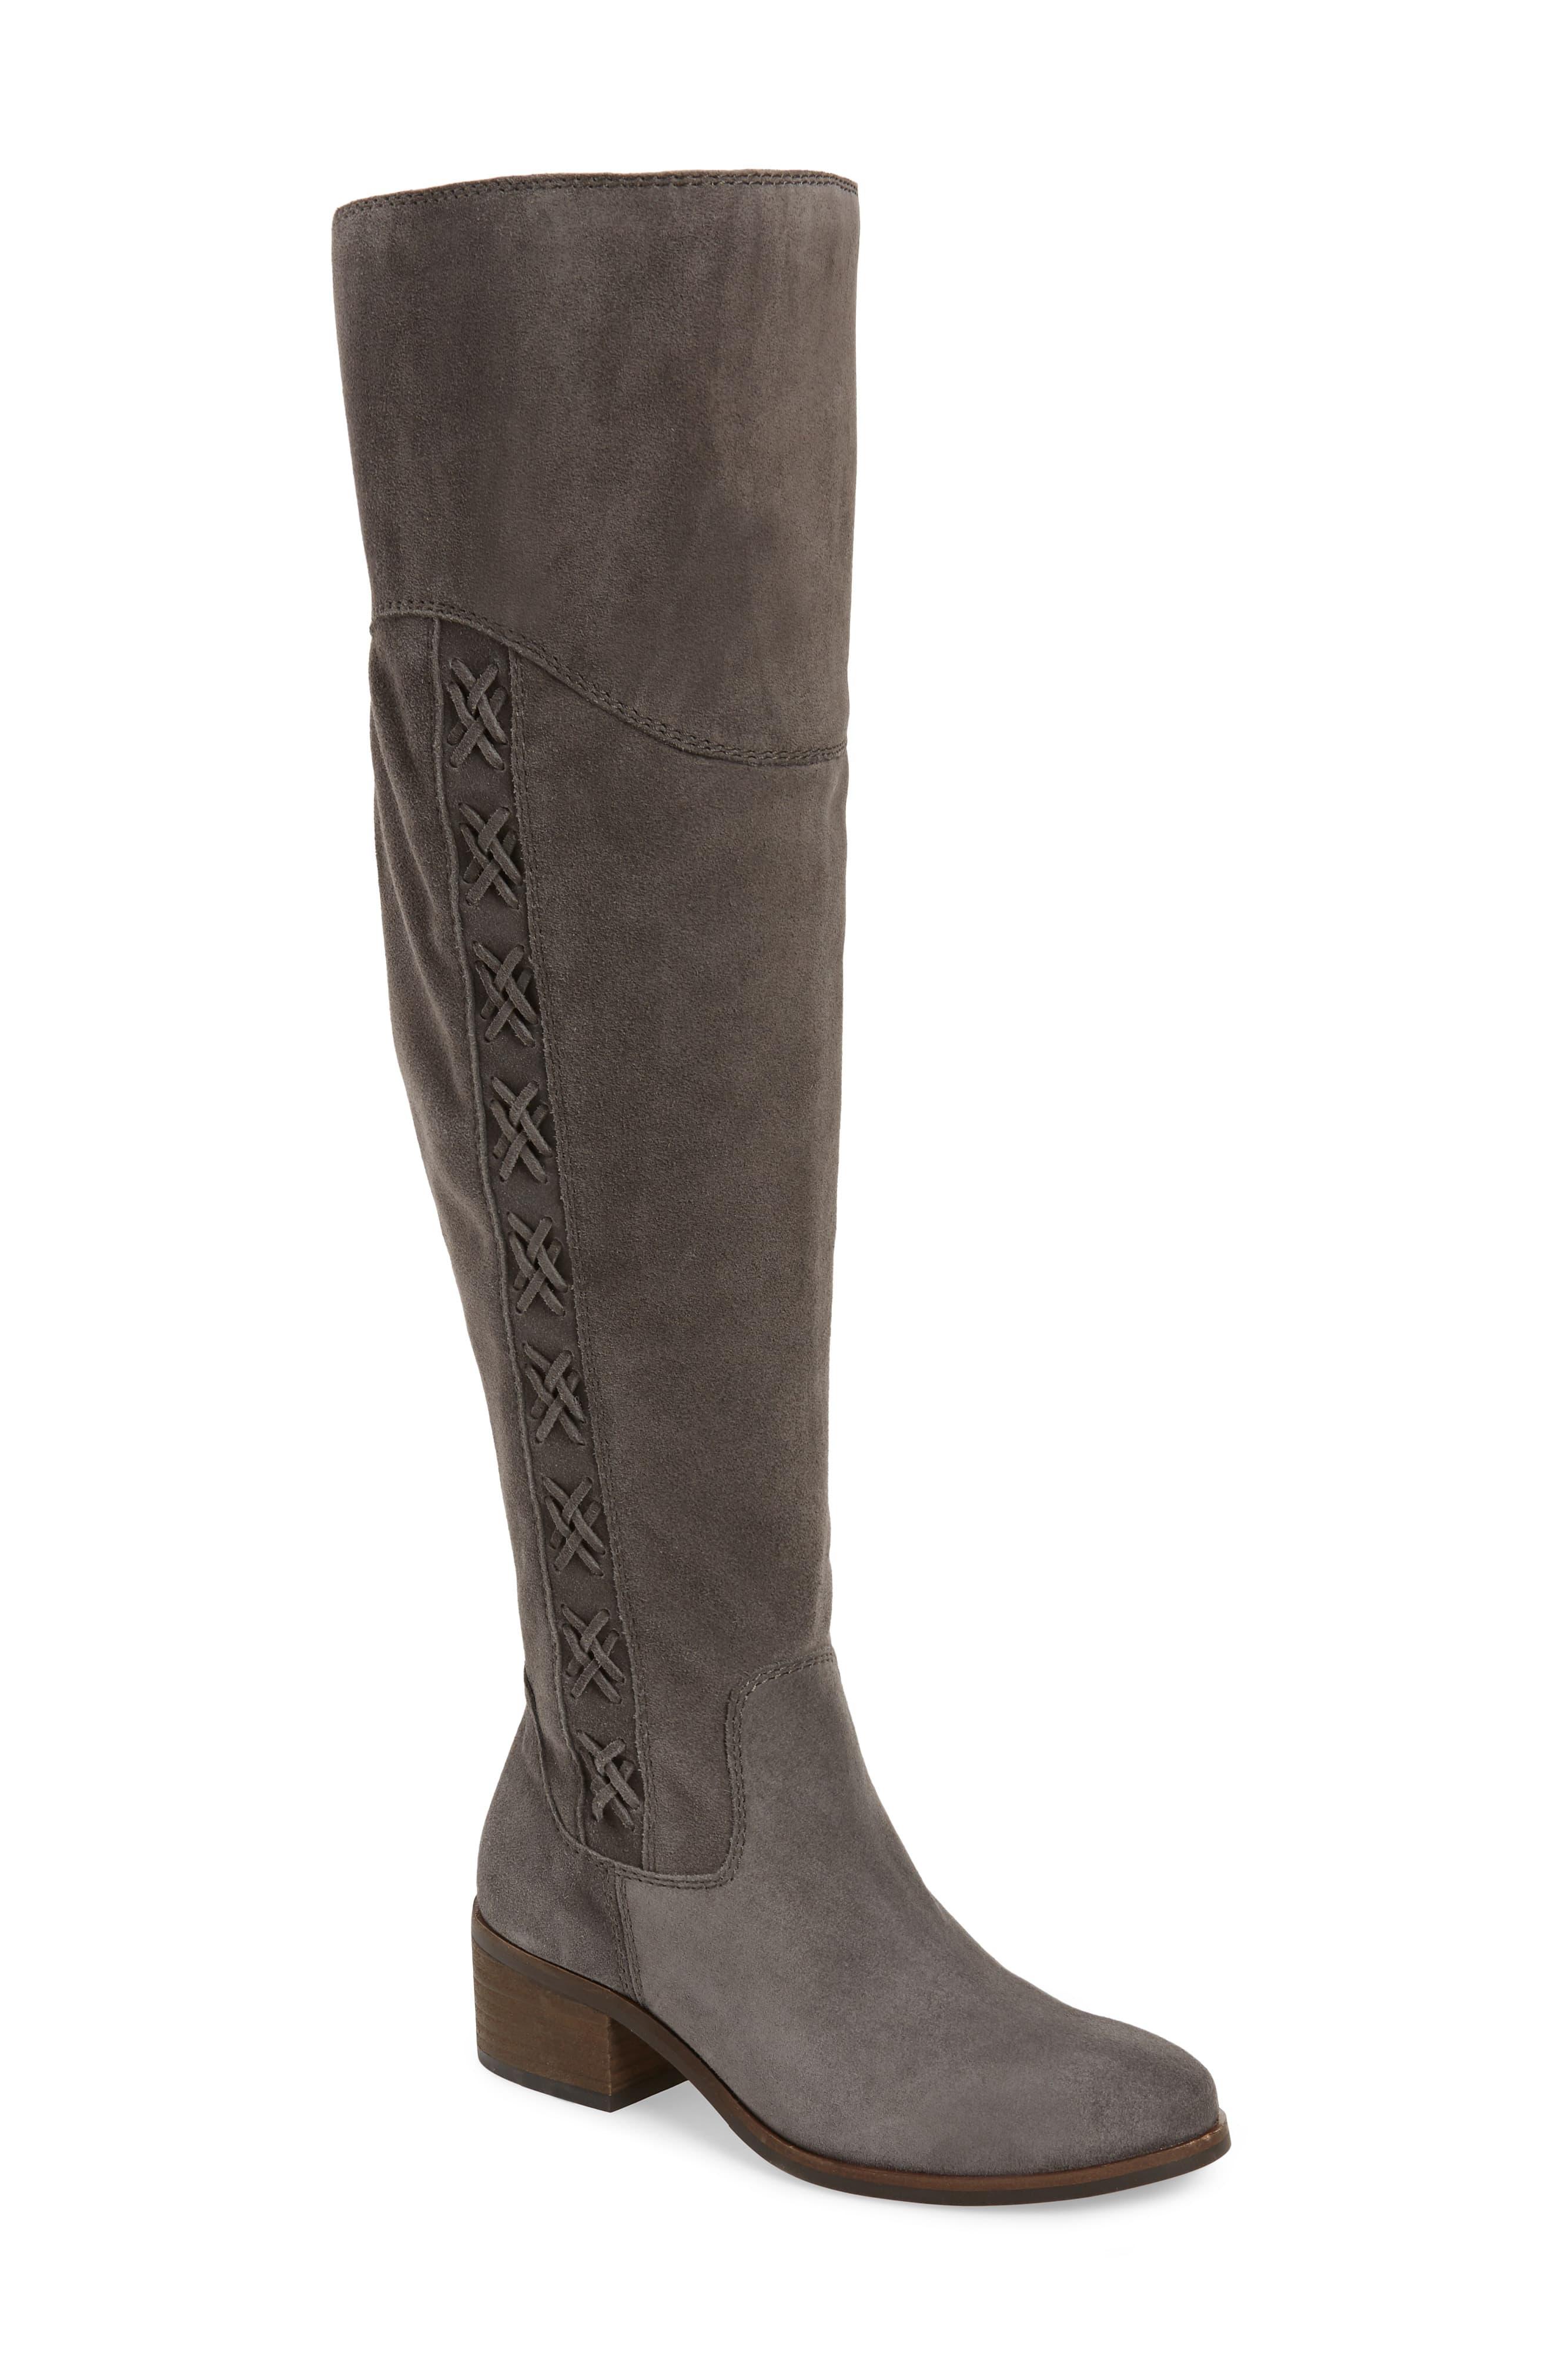 Vince Camuto Kreesell Knee High Boot - Lyst